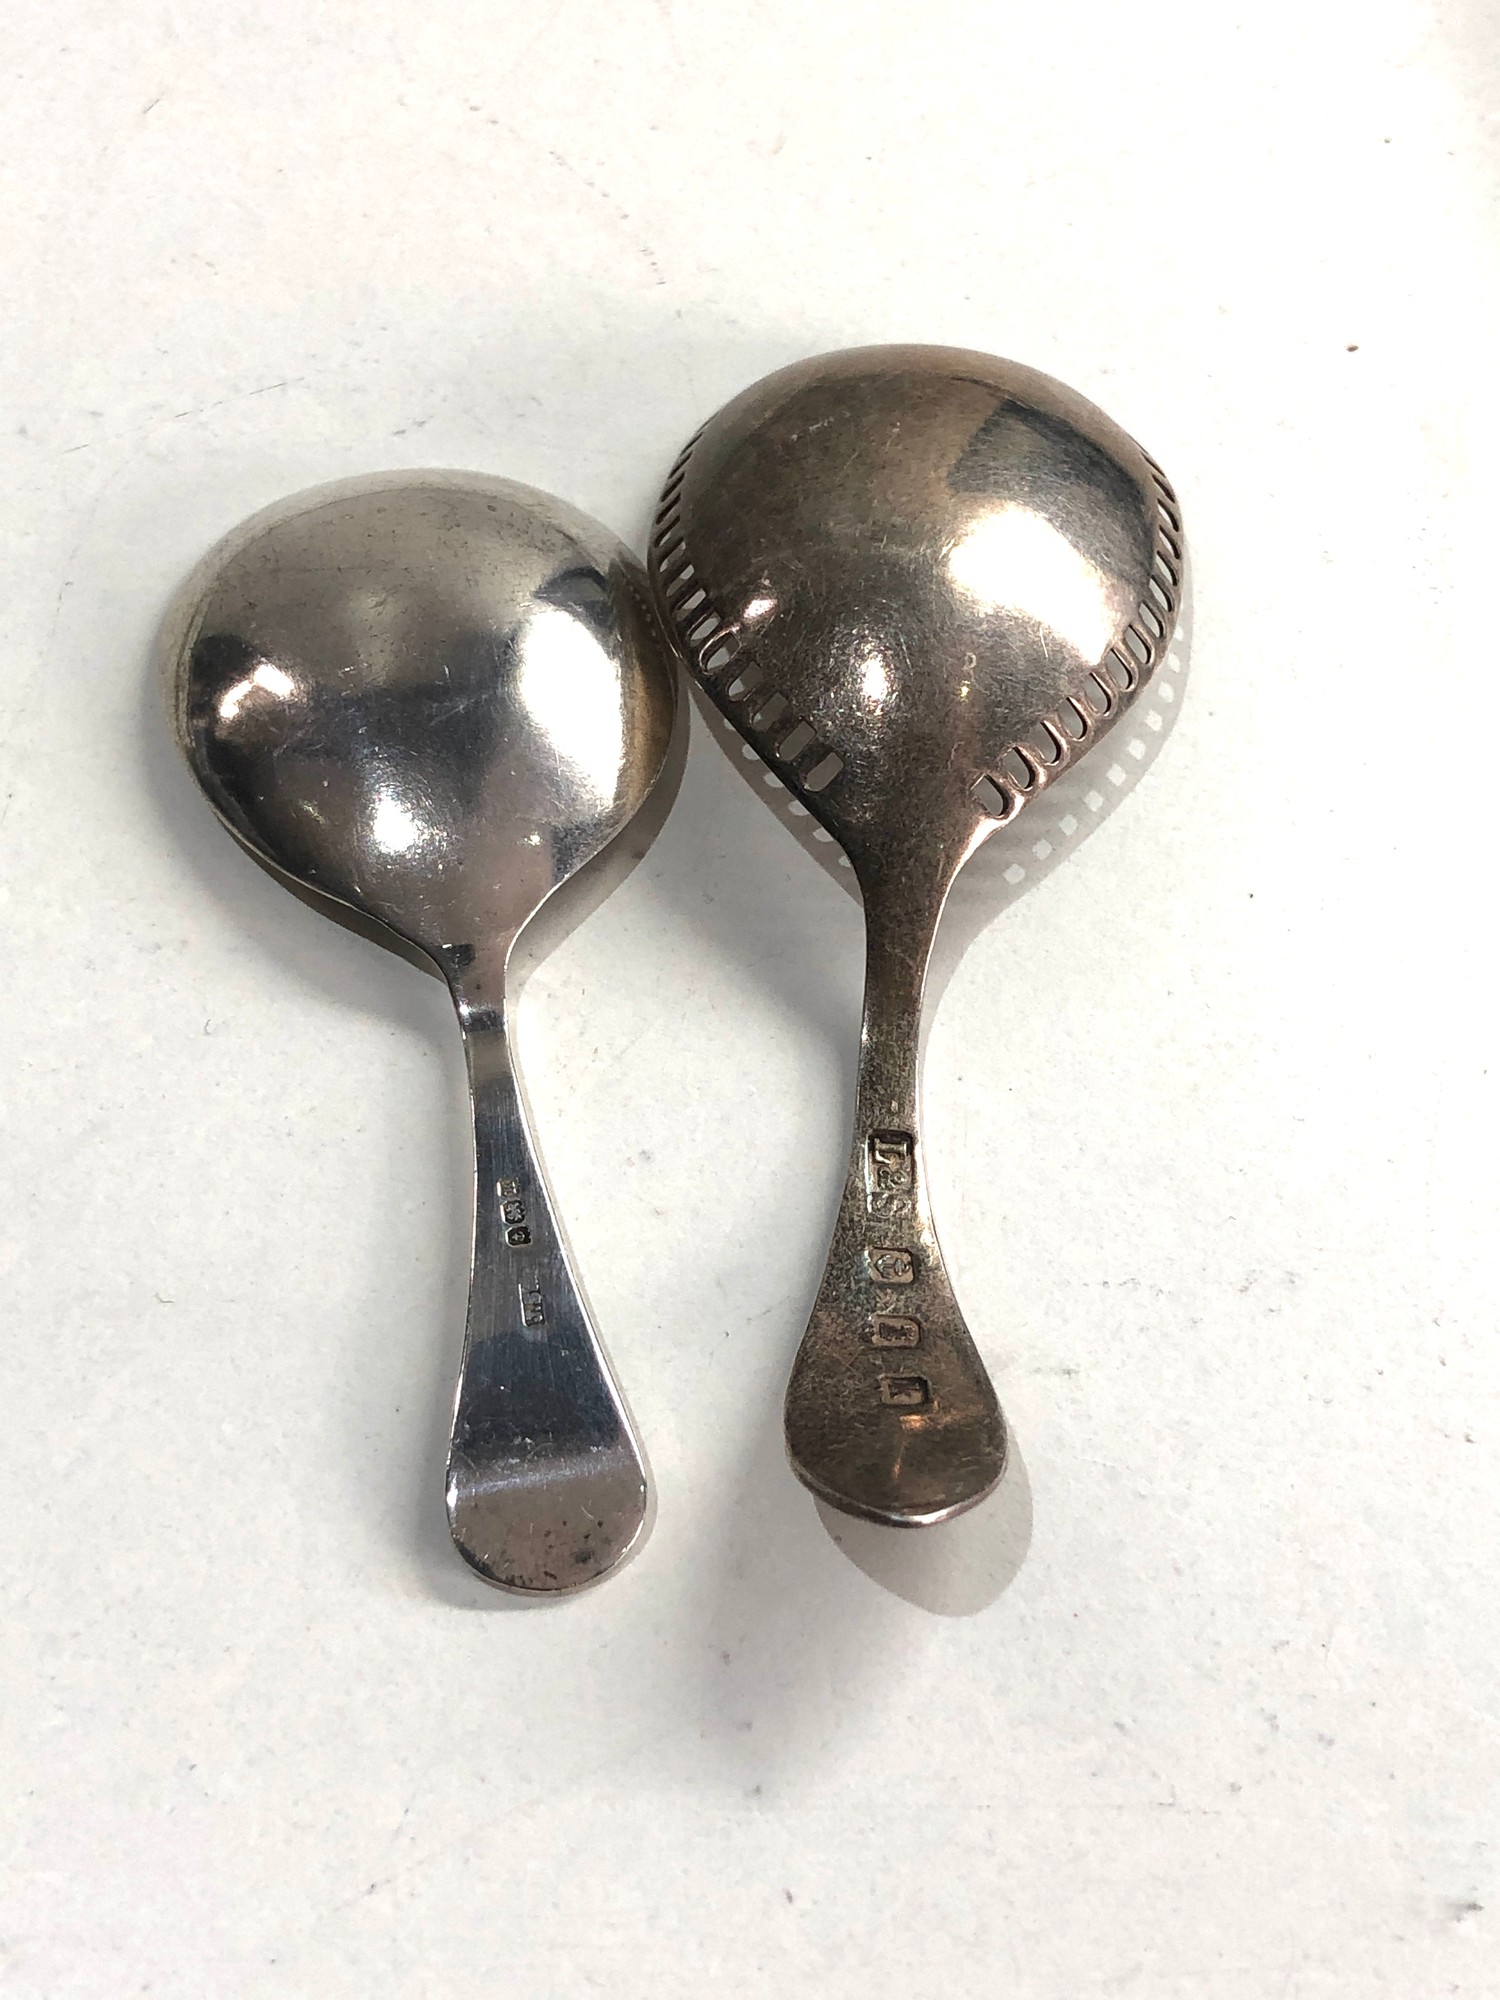 2 antique silver caddy spoons - Image 2 of 4